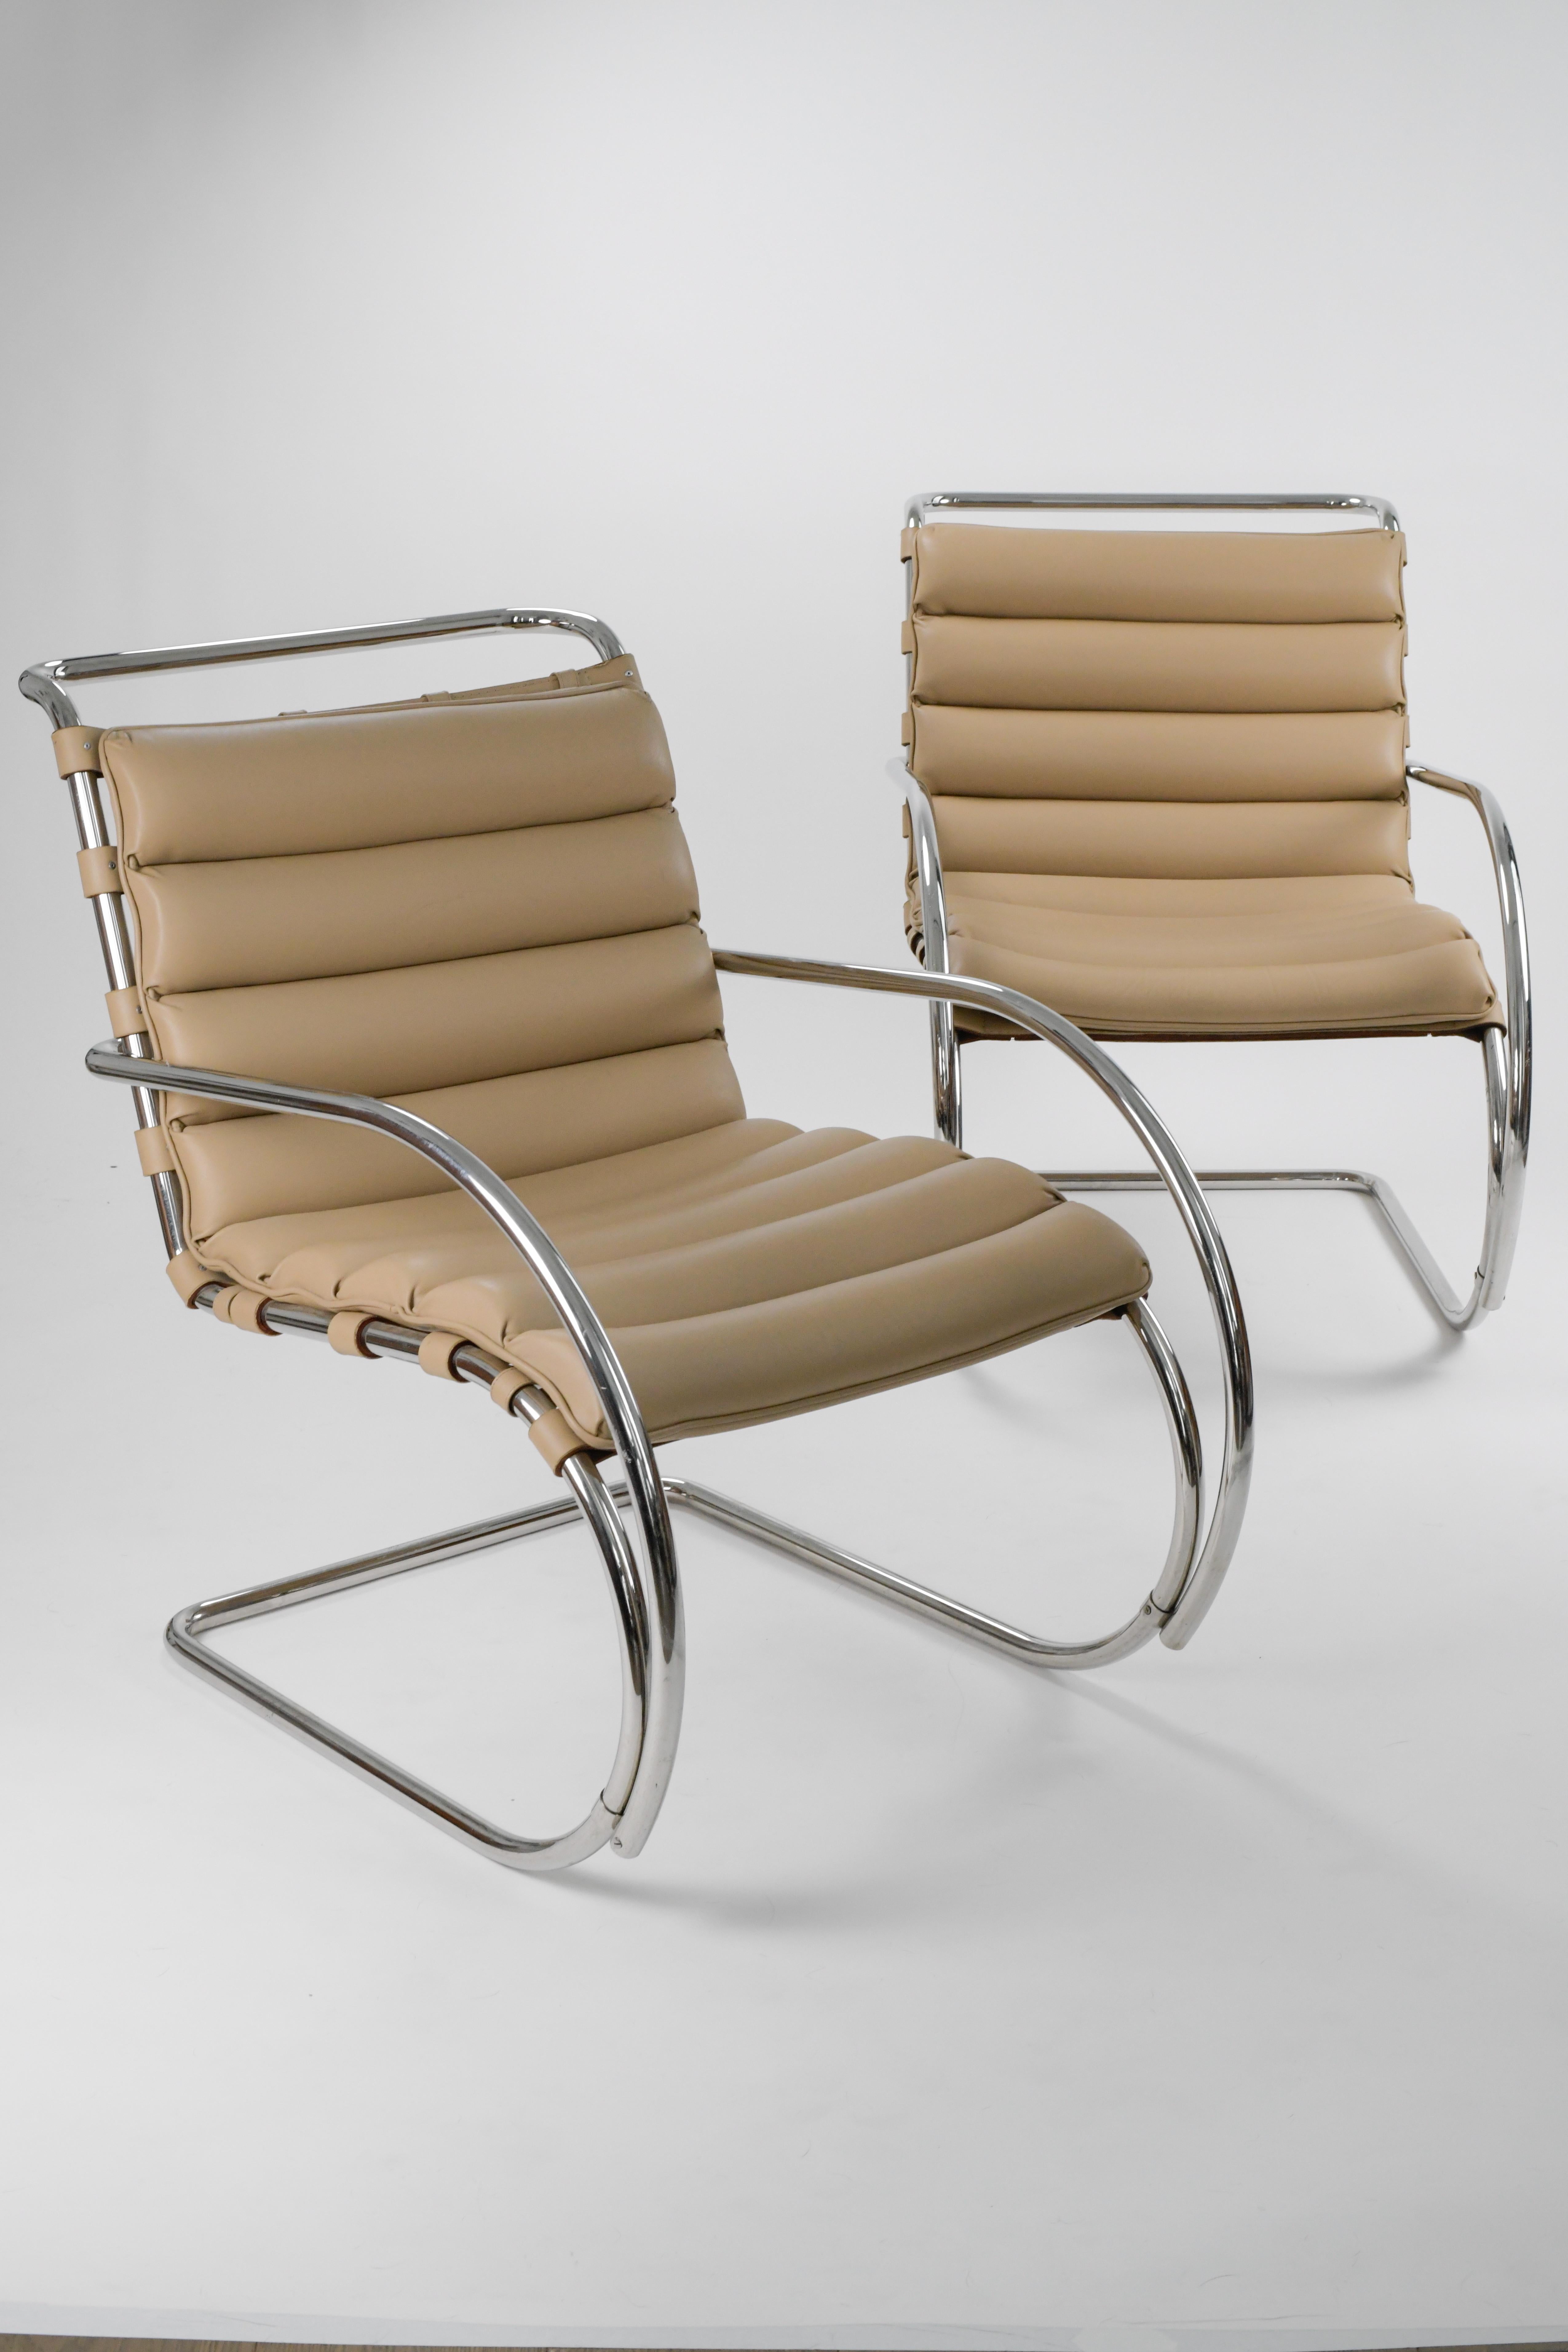 Really nice pair of Mies Van der Rohe MR Lounge Chairs for Knoll in tan leather. We believe this pair to be from the 1980s and considering their age, they are in really good vintage condition. The leather pads are intact with no flaws, we believe